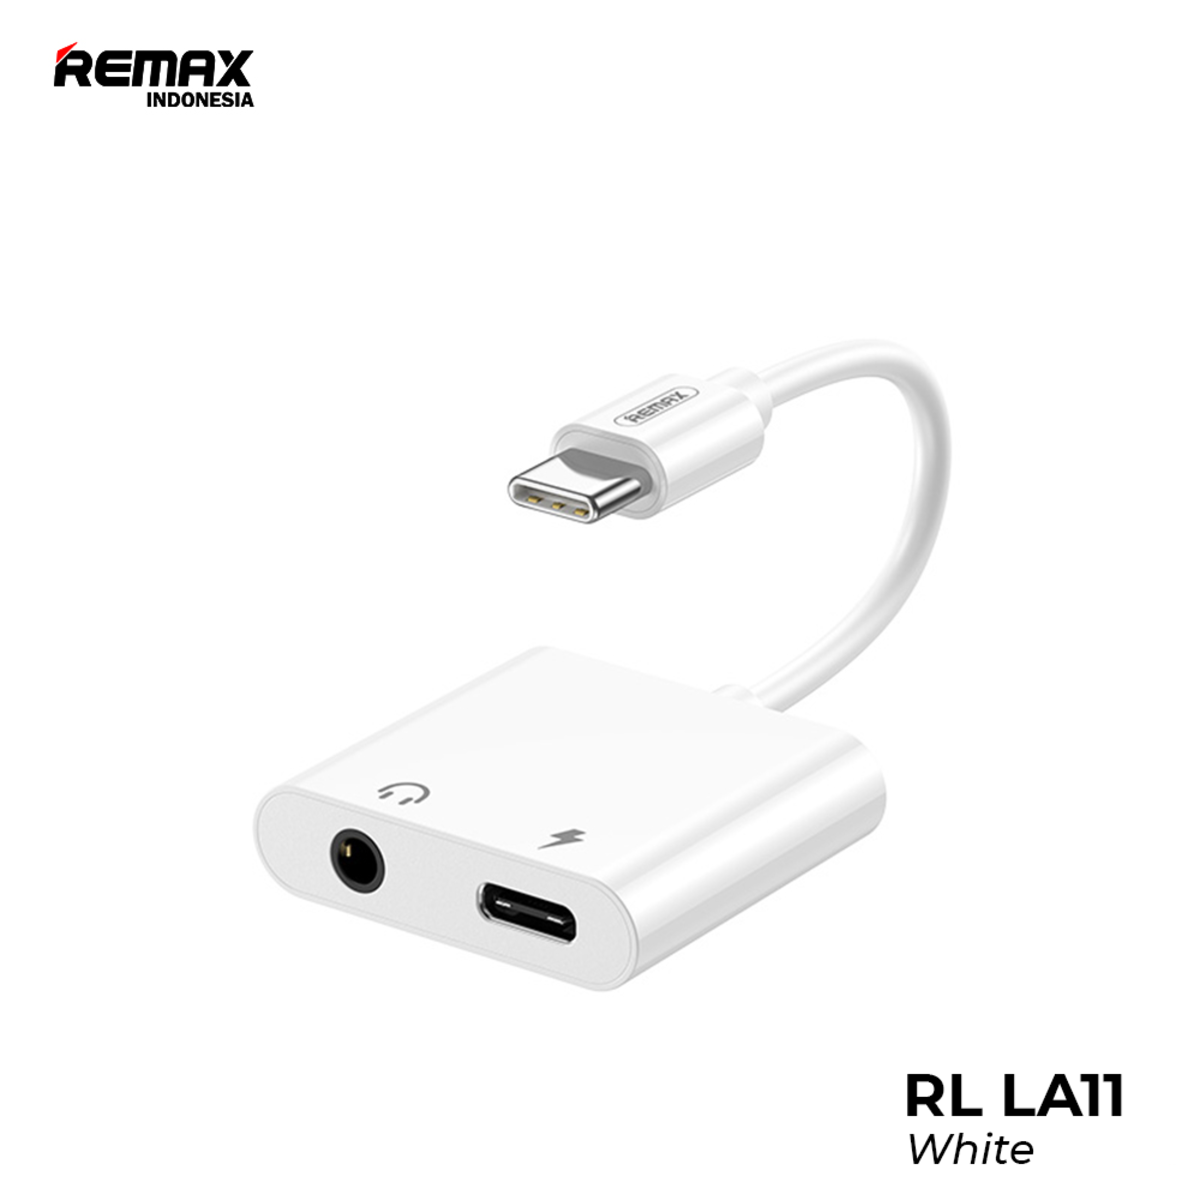 REMAX LA11 REMINE SERIES PHONE ADAPTER TYPE-C TO 3.5 AUX+TYPE-C (120MM), Audio Adapter